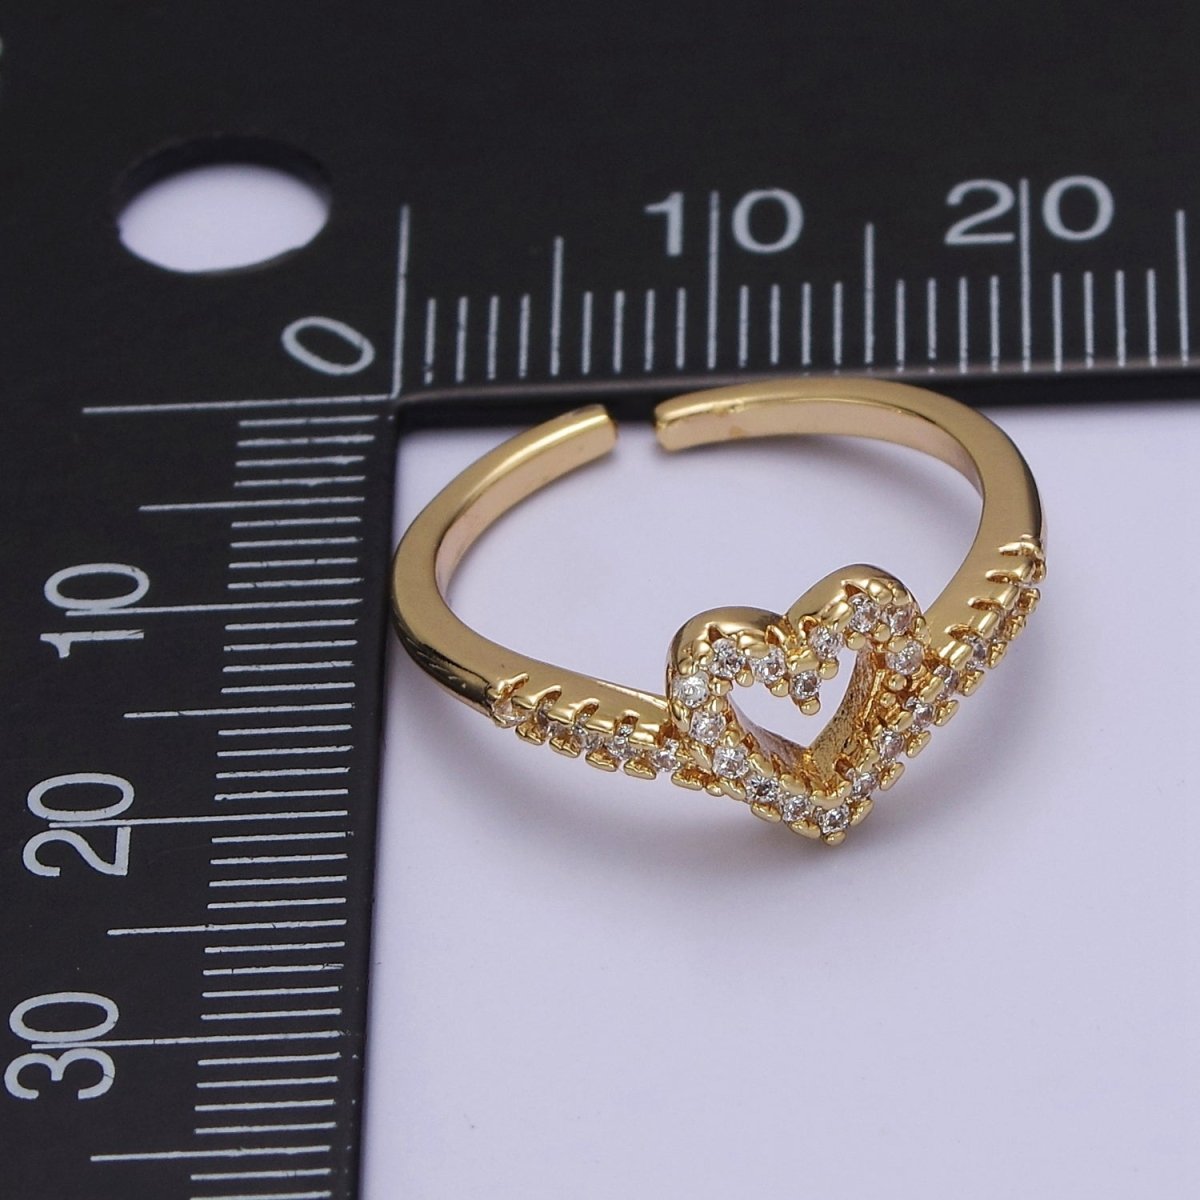 OS Dainty Heart Ring Open Adjustable Gold Filled V Band Ring with CZ Stone For Minimalist Jewelry O-2072 - DLUXCA